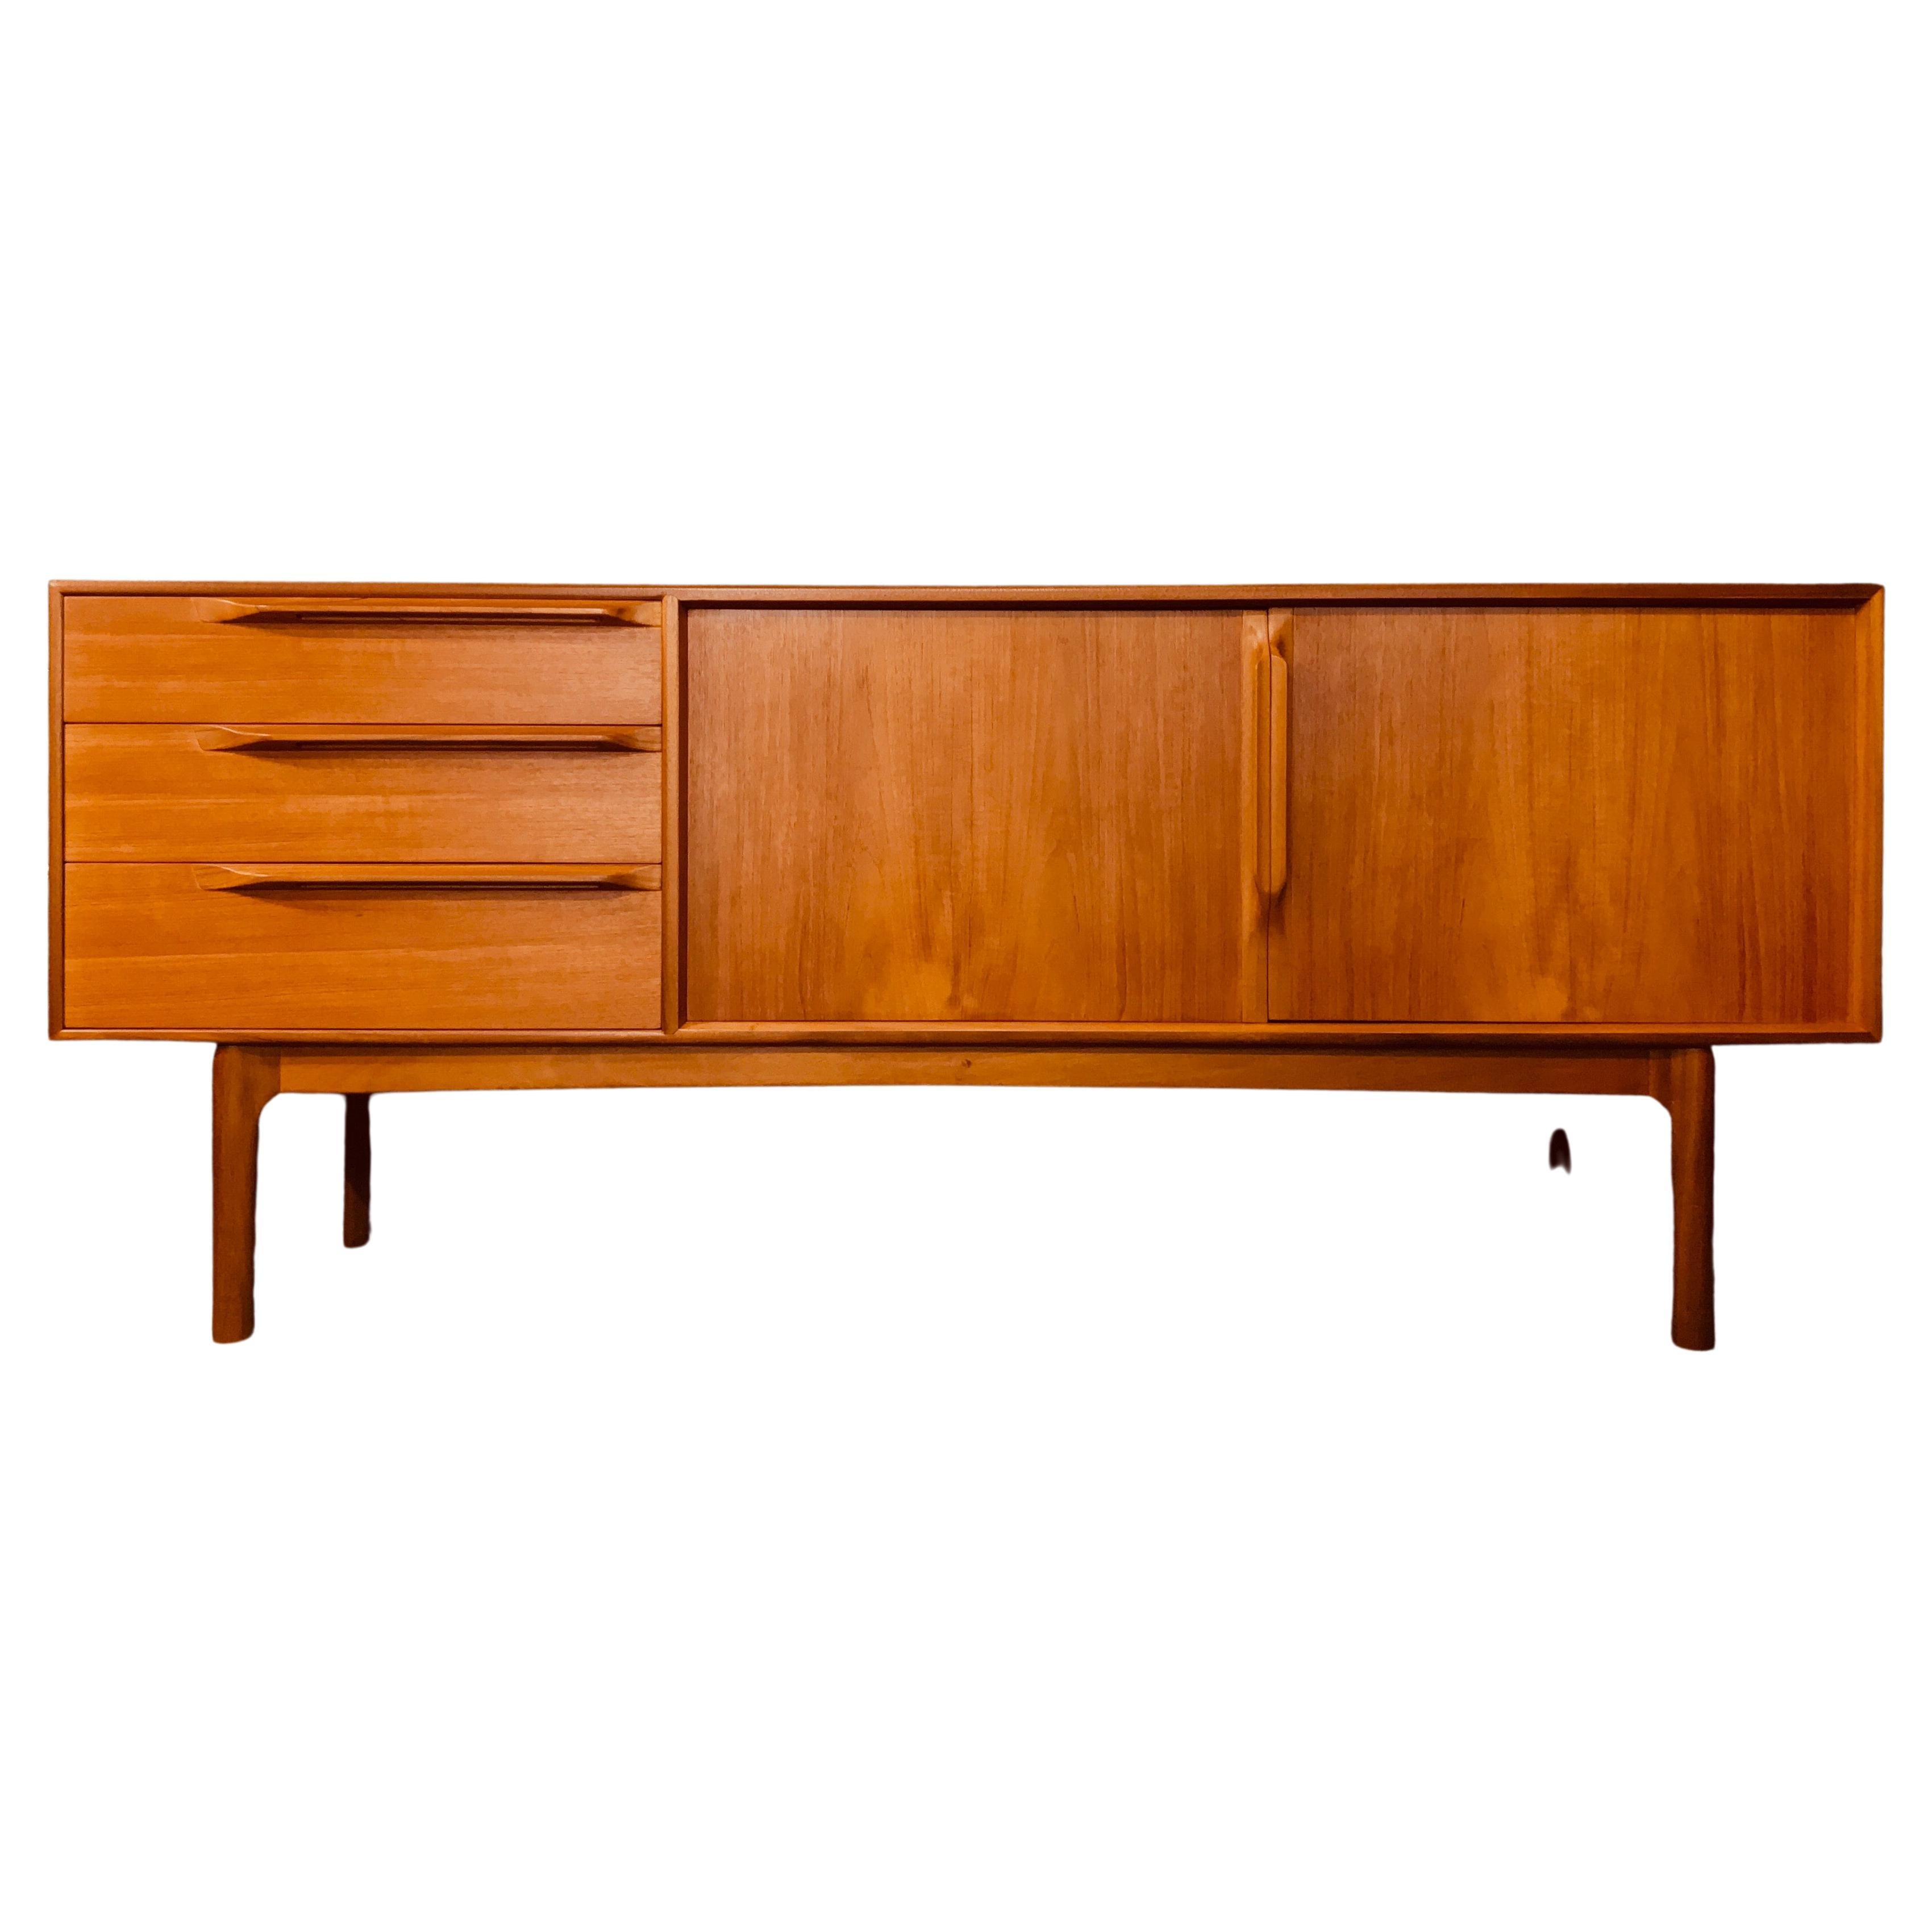 McIntosh teak sideboard, Made in Scotland in the �’70s